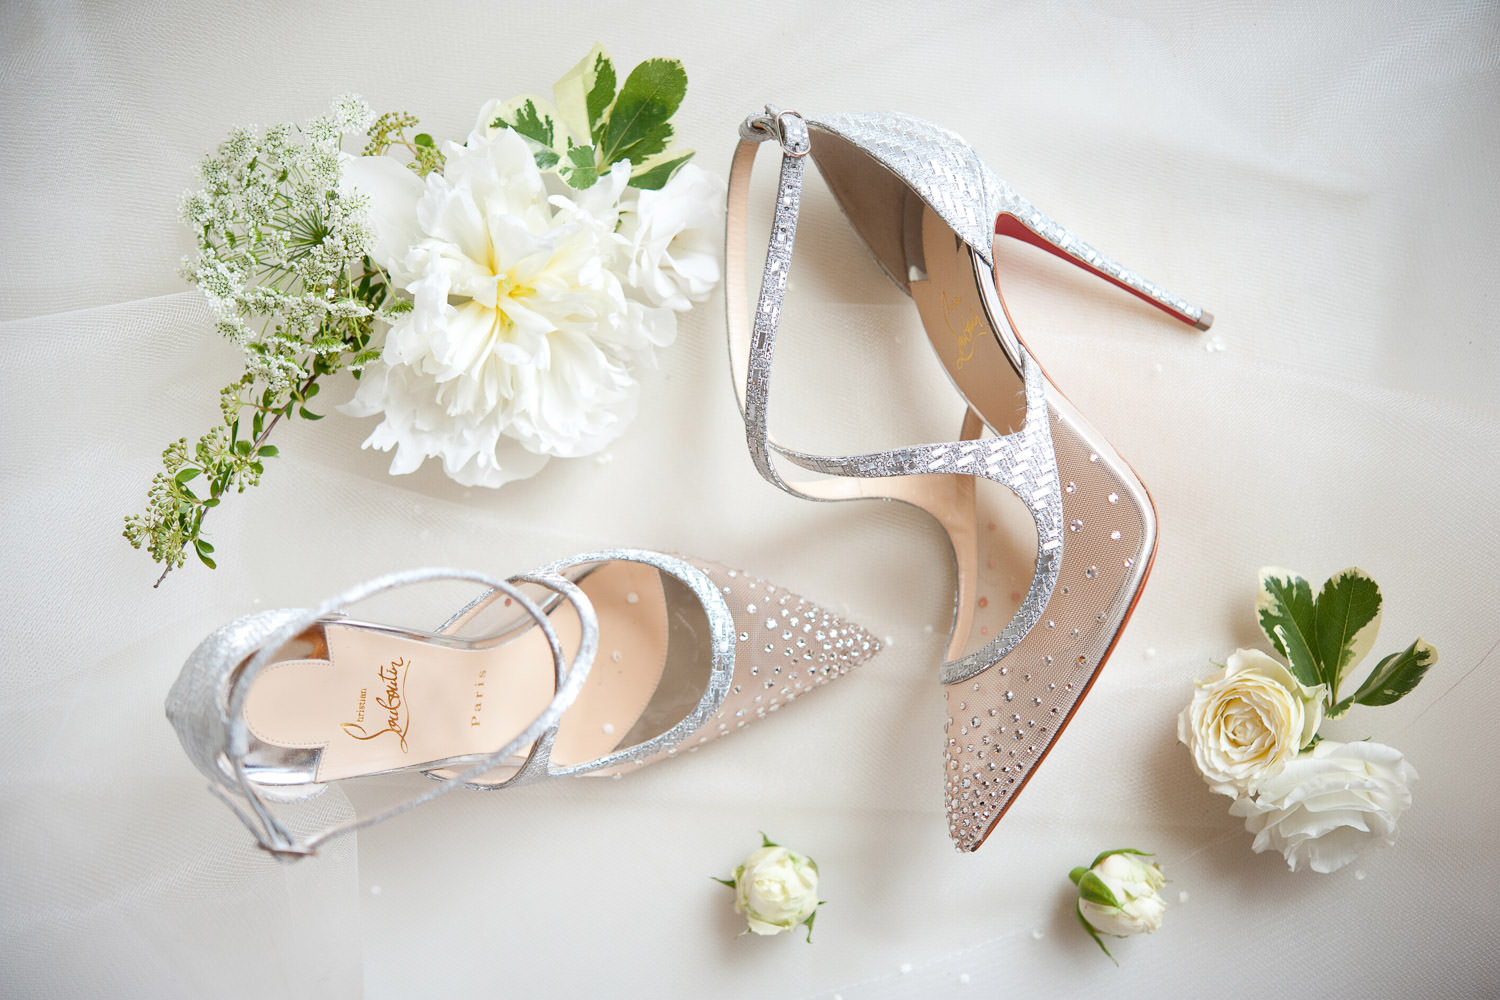 Christian Louboutin pumps captured by Tara Whittaker Photography